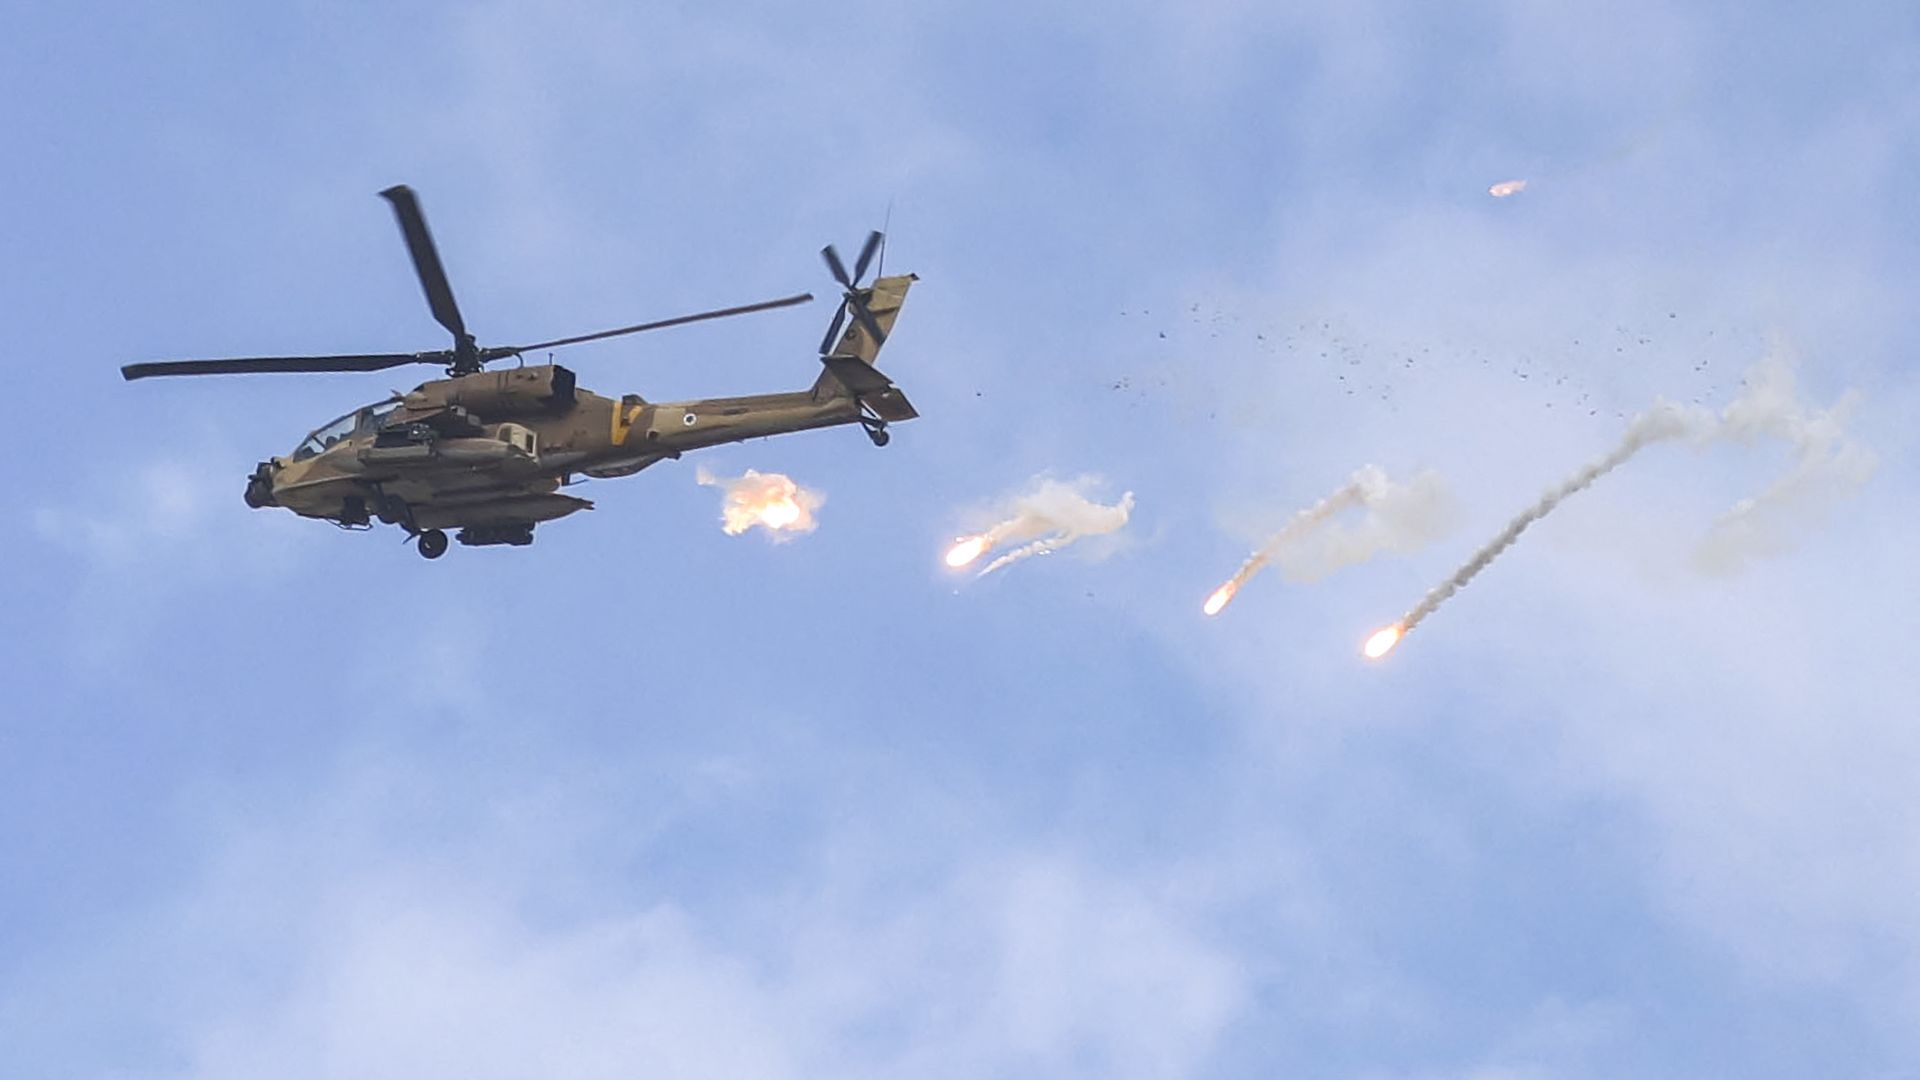 An Israeli Air Force AH-64 Apache attack helicopter releases flares during an Israeli army raid in Jenin in the occupied West Bank on June 19, 2023. Violent clashes erupted in Jenin on June 19 during an Israeli raid on the West B